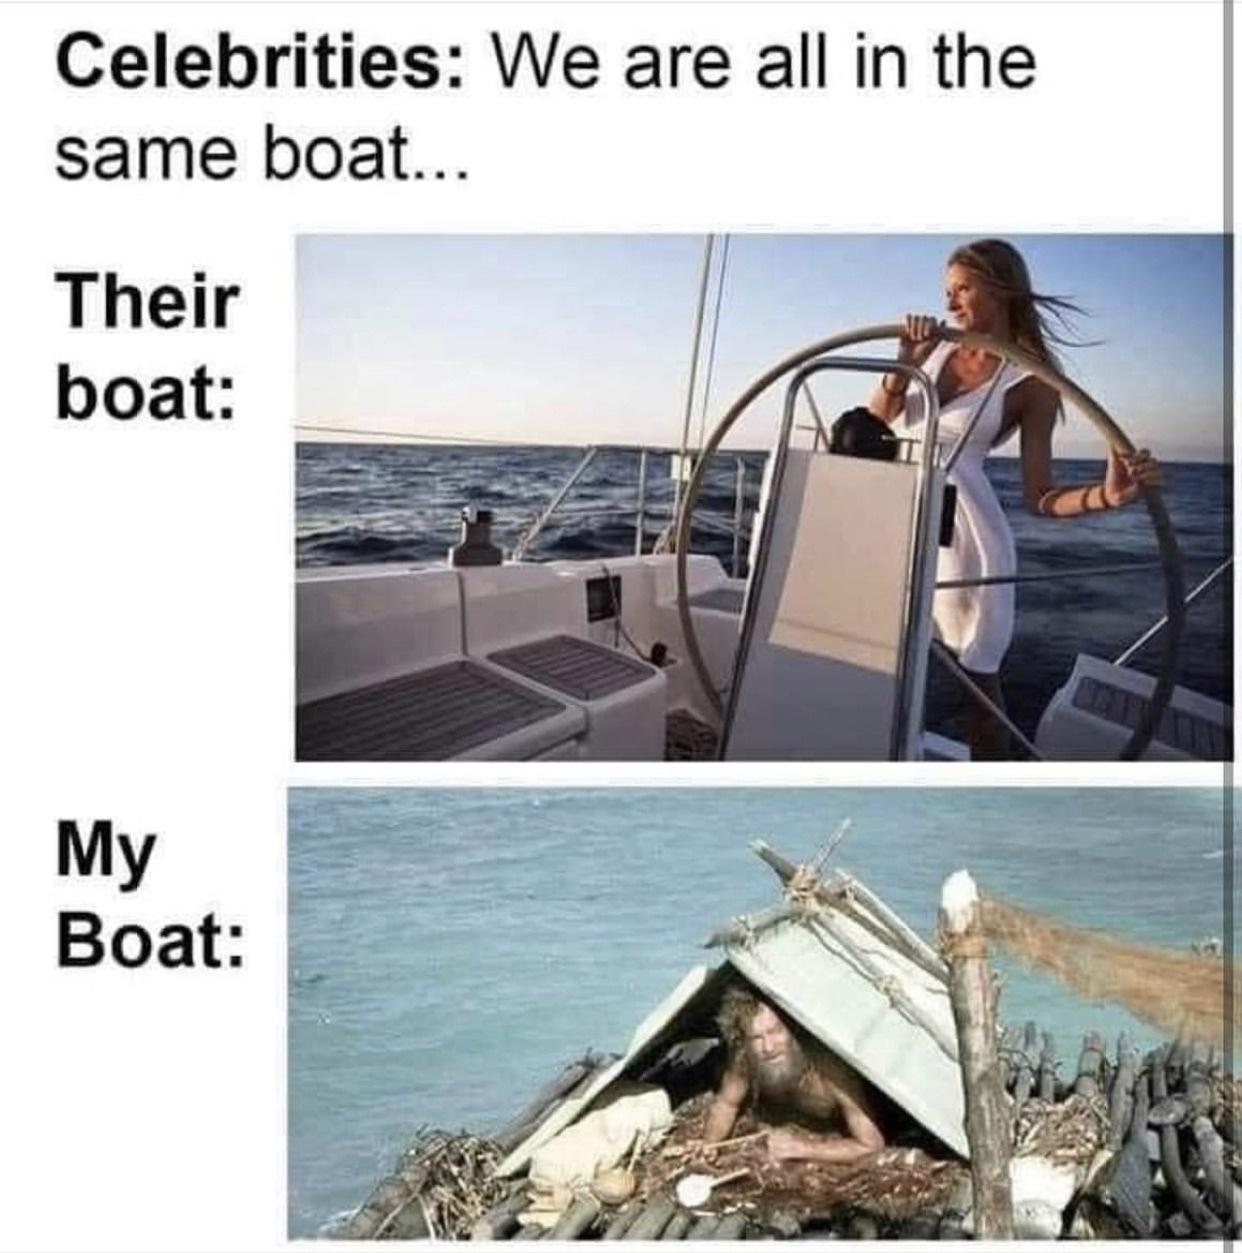 we are all in the same boat - Celebrities We are all in the same boat... Their boat Et My Boat